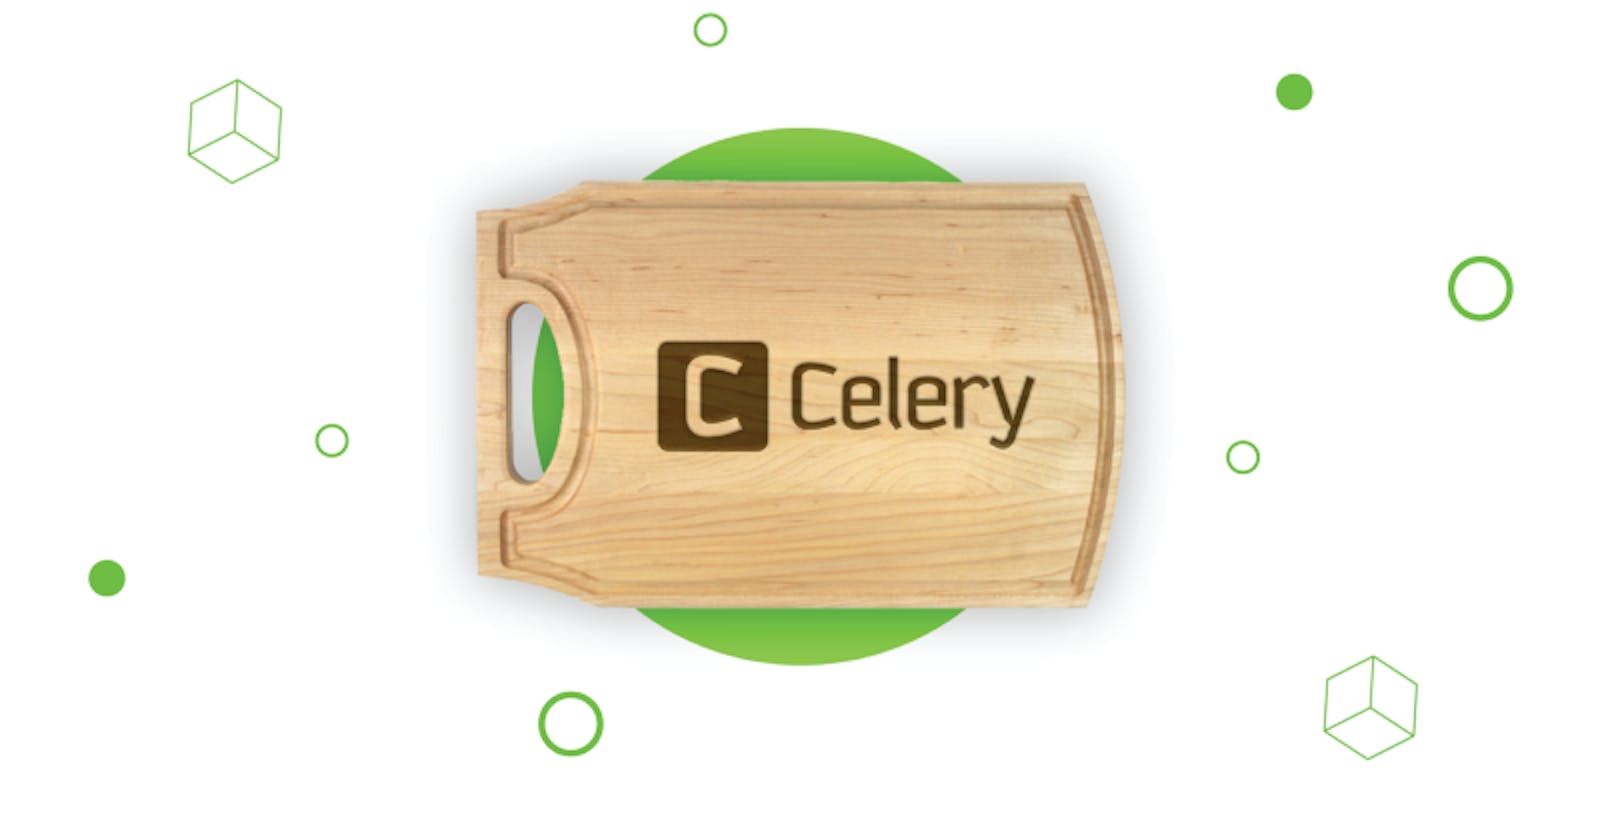 Python Celery Guide: Basics and Use Cases